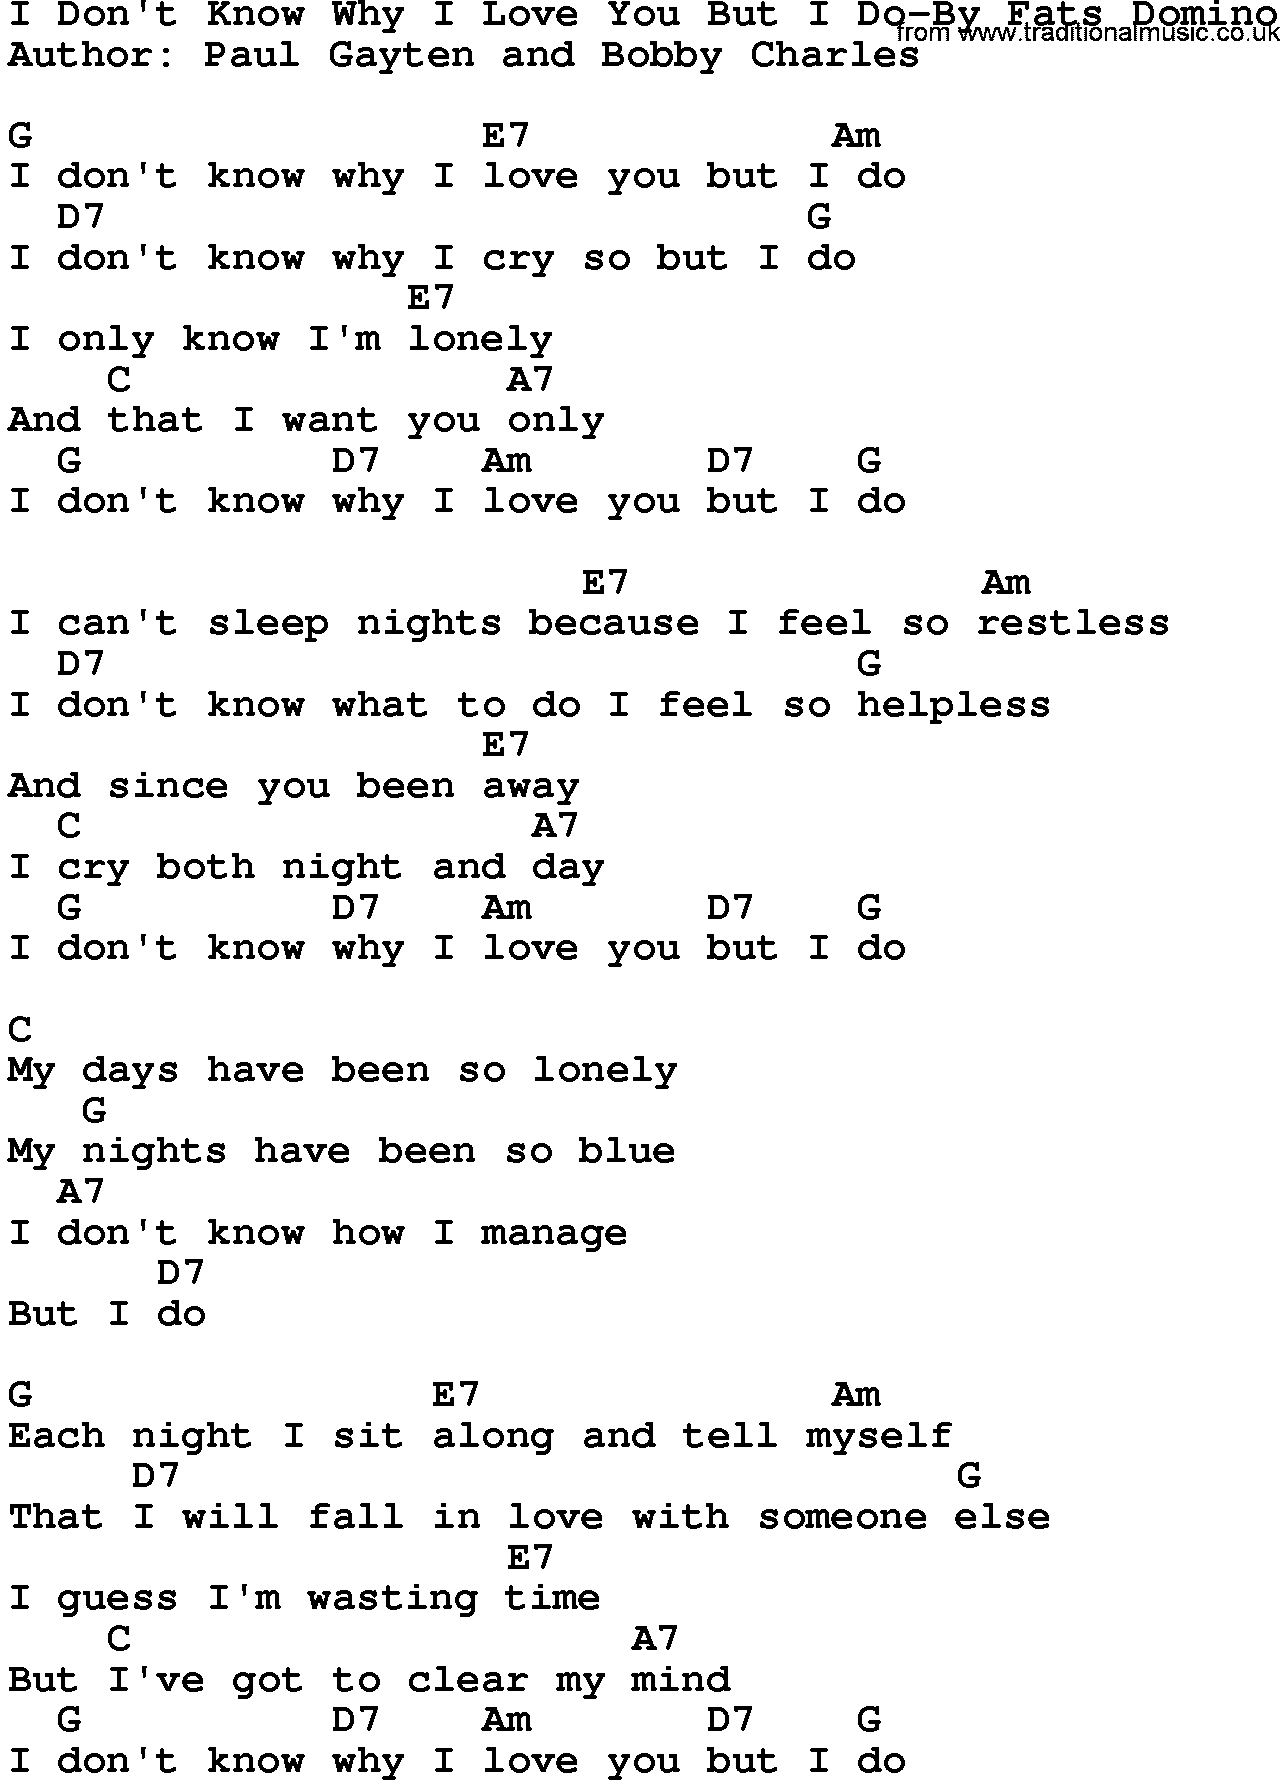 Country music song: I Don't Know Why I Love You But I Do-By Fats Domino lyrics and chords